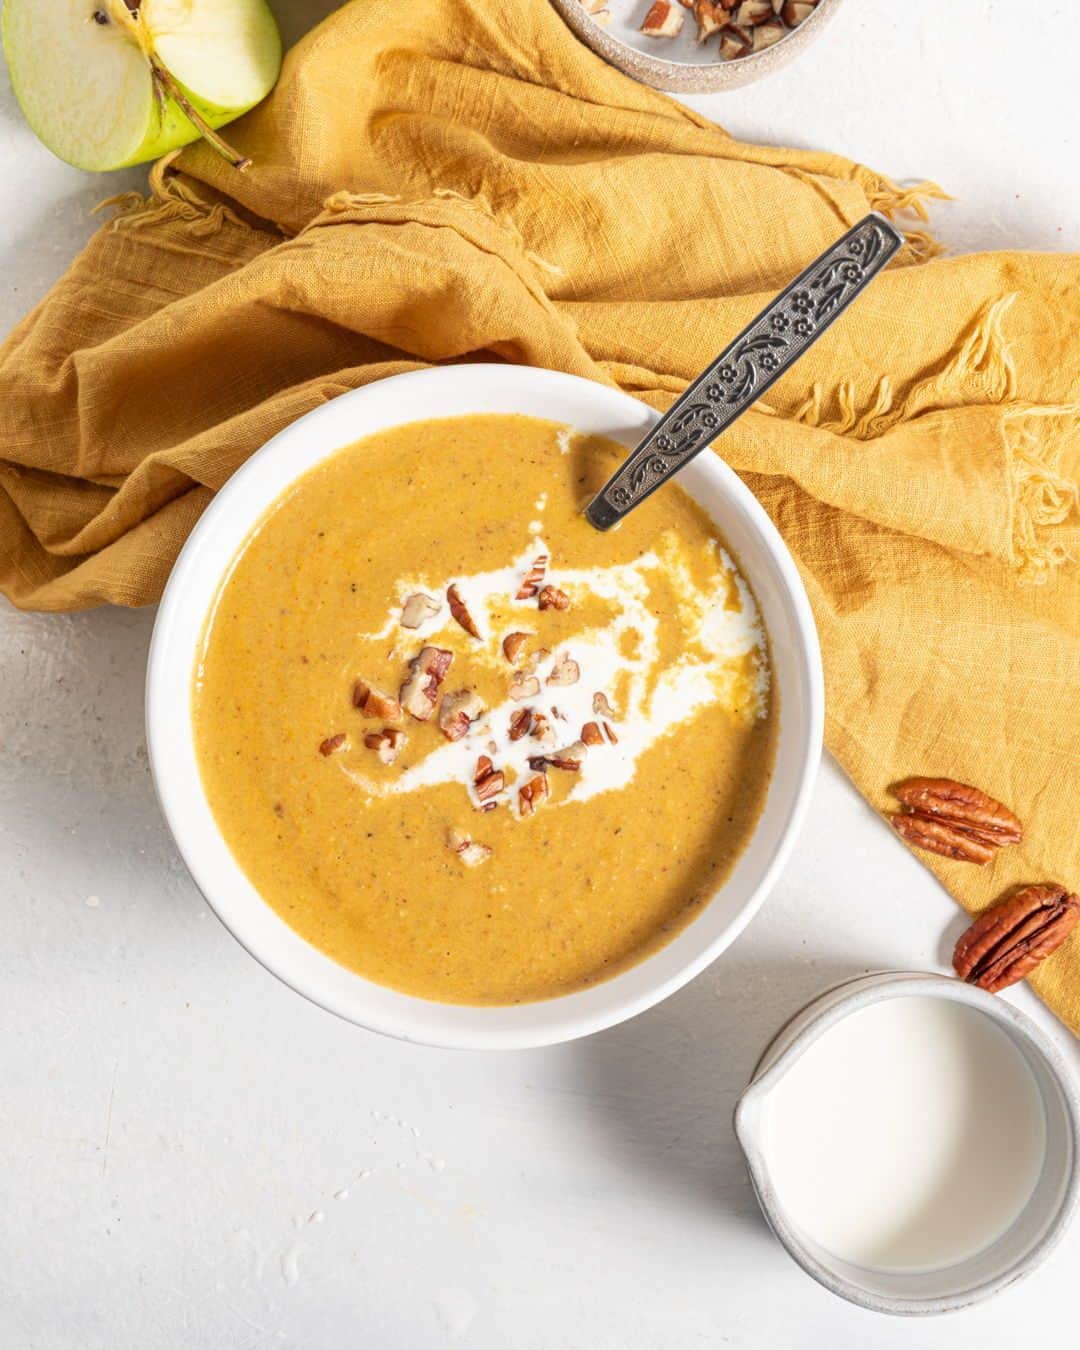 Food Republicさんのインスタグラム写真 - (Food RepublicInstagram)「Nutty Carrot And Apple Soup Recipe  You may never have thought to combine carrots and apples in soup, but these autumnal flavors pair perfectly with nutty pecans and cozy warming spices.  Recipe developed in collaboration with @crumblesofhealth   Prep Time: 10 minutes  Cook Time: 20 minutes  Servings: 4 servings  Ingredients:  - 2 tablespoons olive oil - 3 cups shredded carrots - 1 cup chopped onion - 1 ¼ cup diced russet potatoes - 2 ½ cups shredded sweet apples - 2 cloves garlic, minced - 1 teaspoon dry or fresh thyme leaves - ½ teaspoon ground cinnamon - ¼ teaspoon ground nutmeg - ¼ teaspoon ginger powder - ½ teaspoon salt - ½ teaspoon ground black pepper - ¾ cup chopped pecans - 5 cups vegetable stock, divided - ½ cup heavy cream  Directions: 1. Add the olive oil to a skillet and place over medium heat. Add the shredded carrots and chopped onion and cook until soft.  2. Add the diced potato and cook for 2 more minutes.  3. Stir in the shredded apple and cook for 1 minute, then stir in the garlic, thyme, cinnamon, nutmeg, ginger, salt, black pepper, and pecans.  4. Pour in ½ cup vegetable stock and continue to cook the vegetable mixture for 2 minutes.  5. Transfer the mixture to a pot, add the rest of the stock, and return to the stove over medium heat. Cook for 5 more minutes.  6. Transfer the soup to a blender and blend until smooth.  7. Pour the soup back into the pot over medium heat, and stir in the cream. Cook for 1-2 more minutes.  8. Serve warm.  -  #food #instafood #foodie #foodporn #dinner #yummy #delicious #foodstagram #yum #cooking #recipe #foodphotography #instagood #foodpics #foodlover #foodgasm #homemade #foodpic #tasty #soup #soups #appetizier」10月25日 2時24分 - foodrepublic